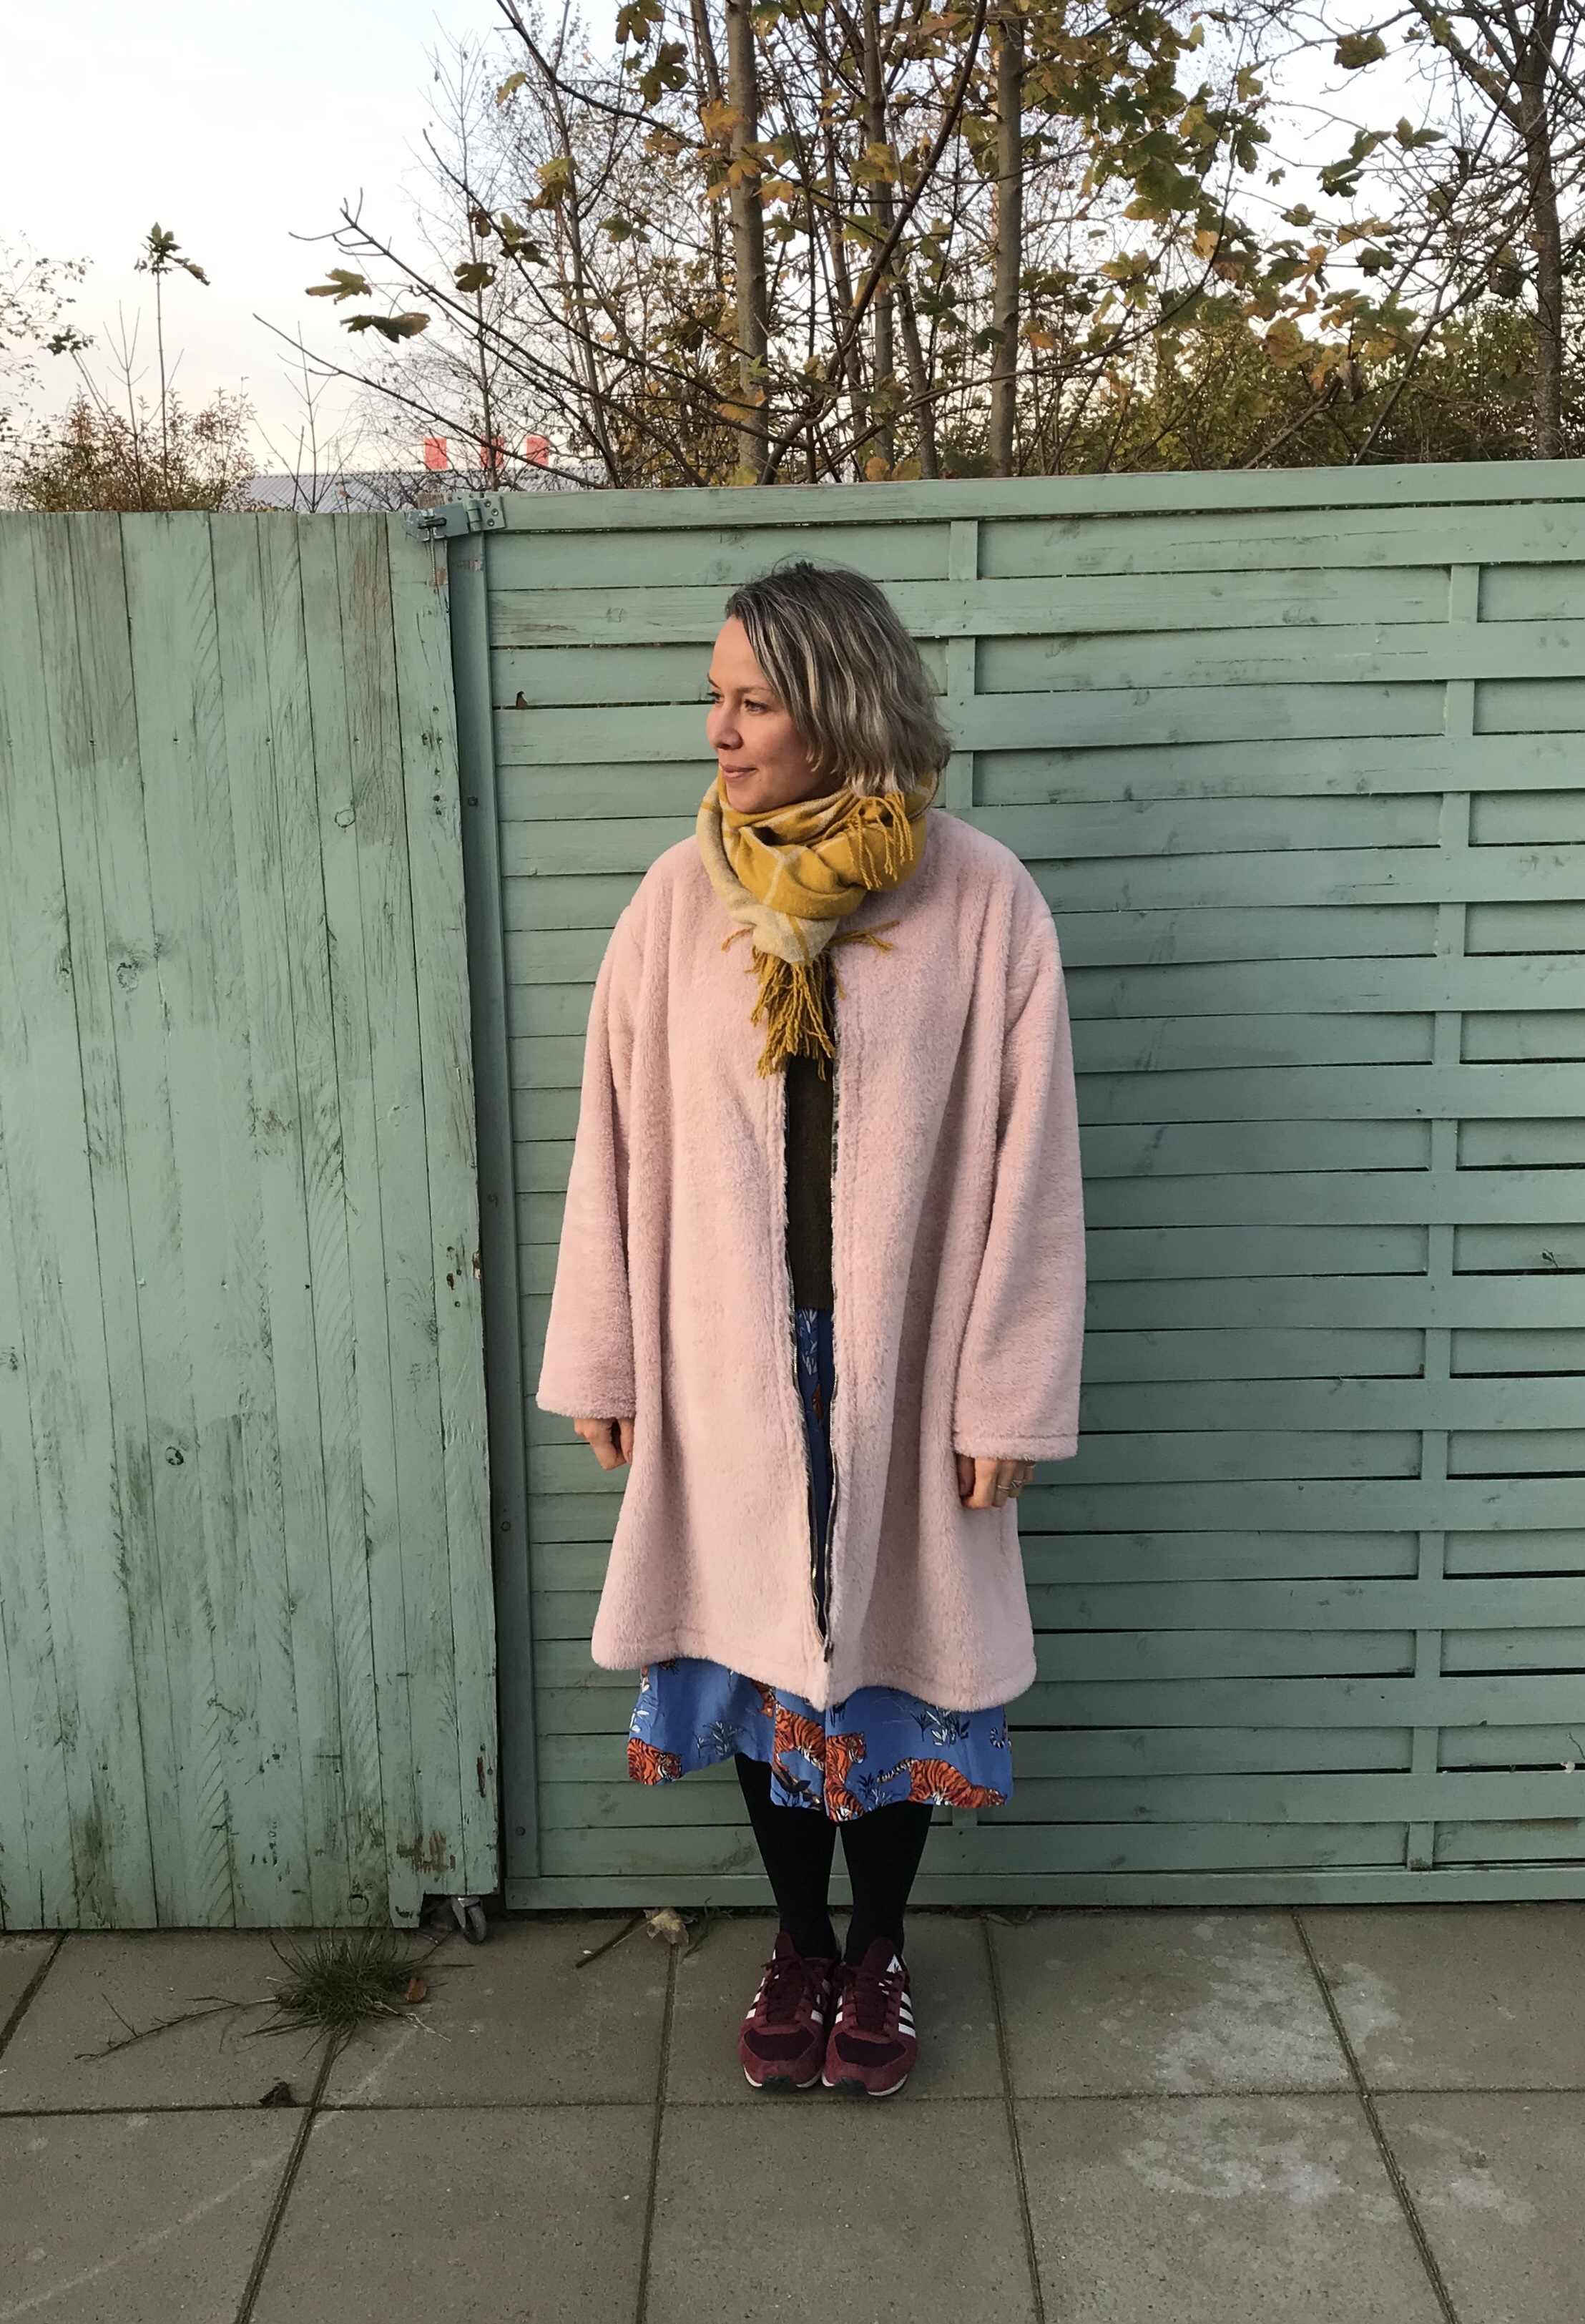 My version of the Simply Sewing DIY faux fur in pink